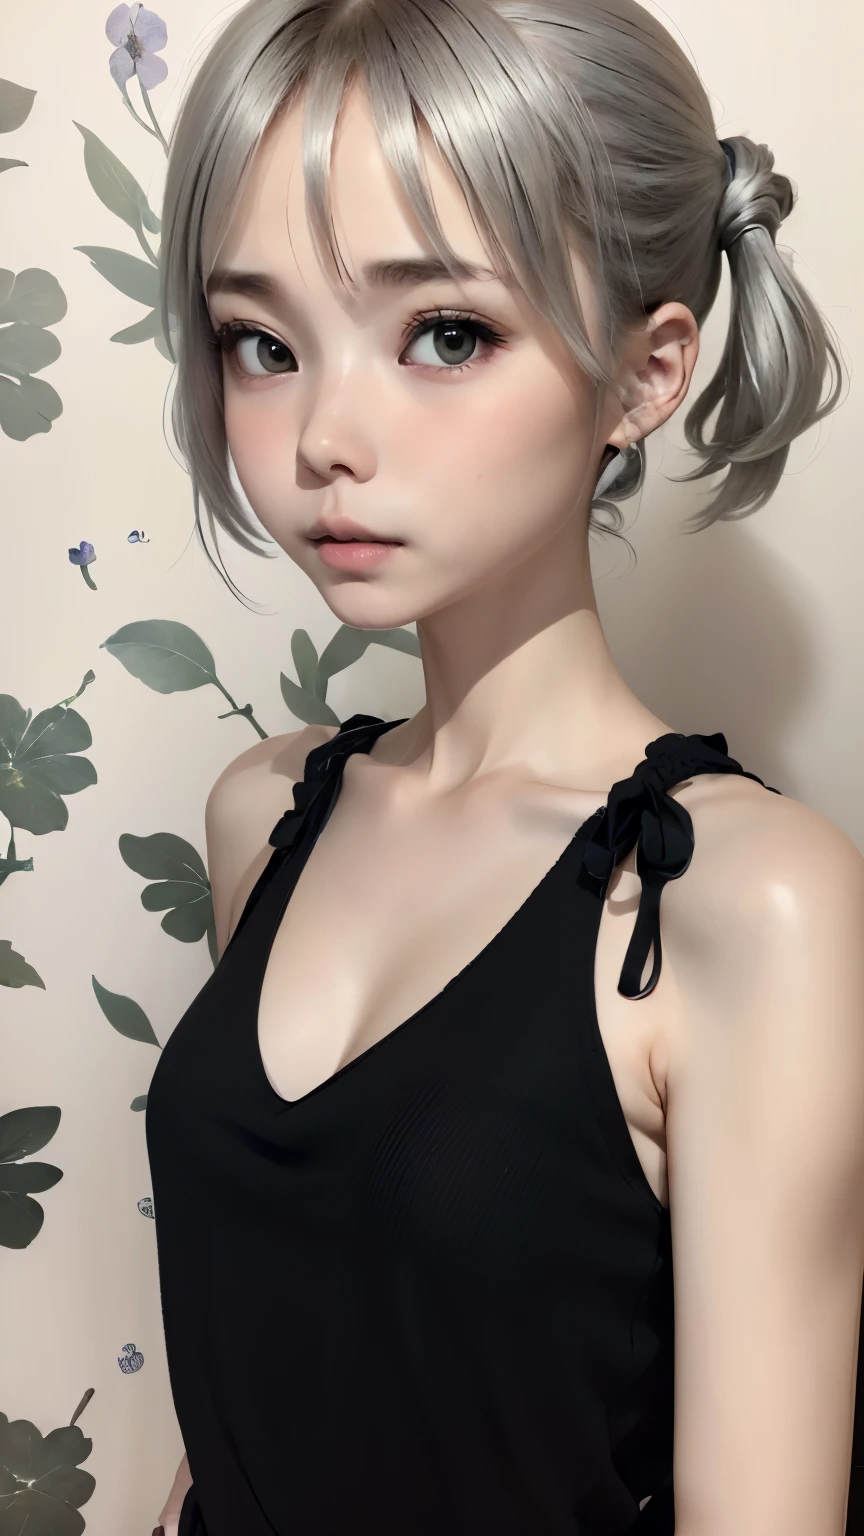 ((wallpaper 8k)), ((surreal)), ((Quality with attention to detail:1.2)), 1 girl, １４talent、kind eyes、plump lips、Ash gray hair、ショートヘアー、短い髪のツインテール、An ennui look、small breasts、small breasts、black elegant dress,Black capelet, look up, Widespread poverty, short cut hair、short hair twintails、Ash gray hair:1.5、white skin、